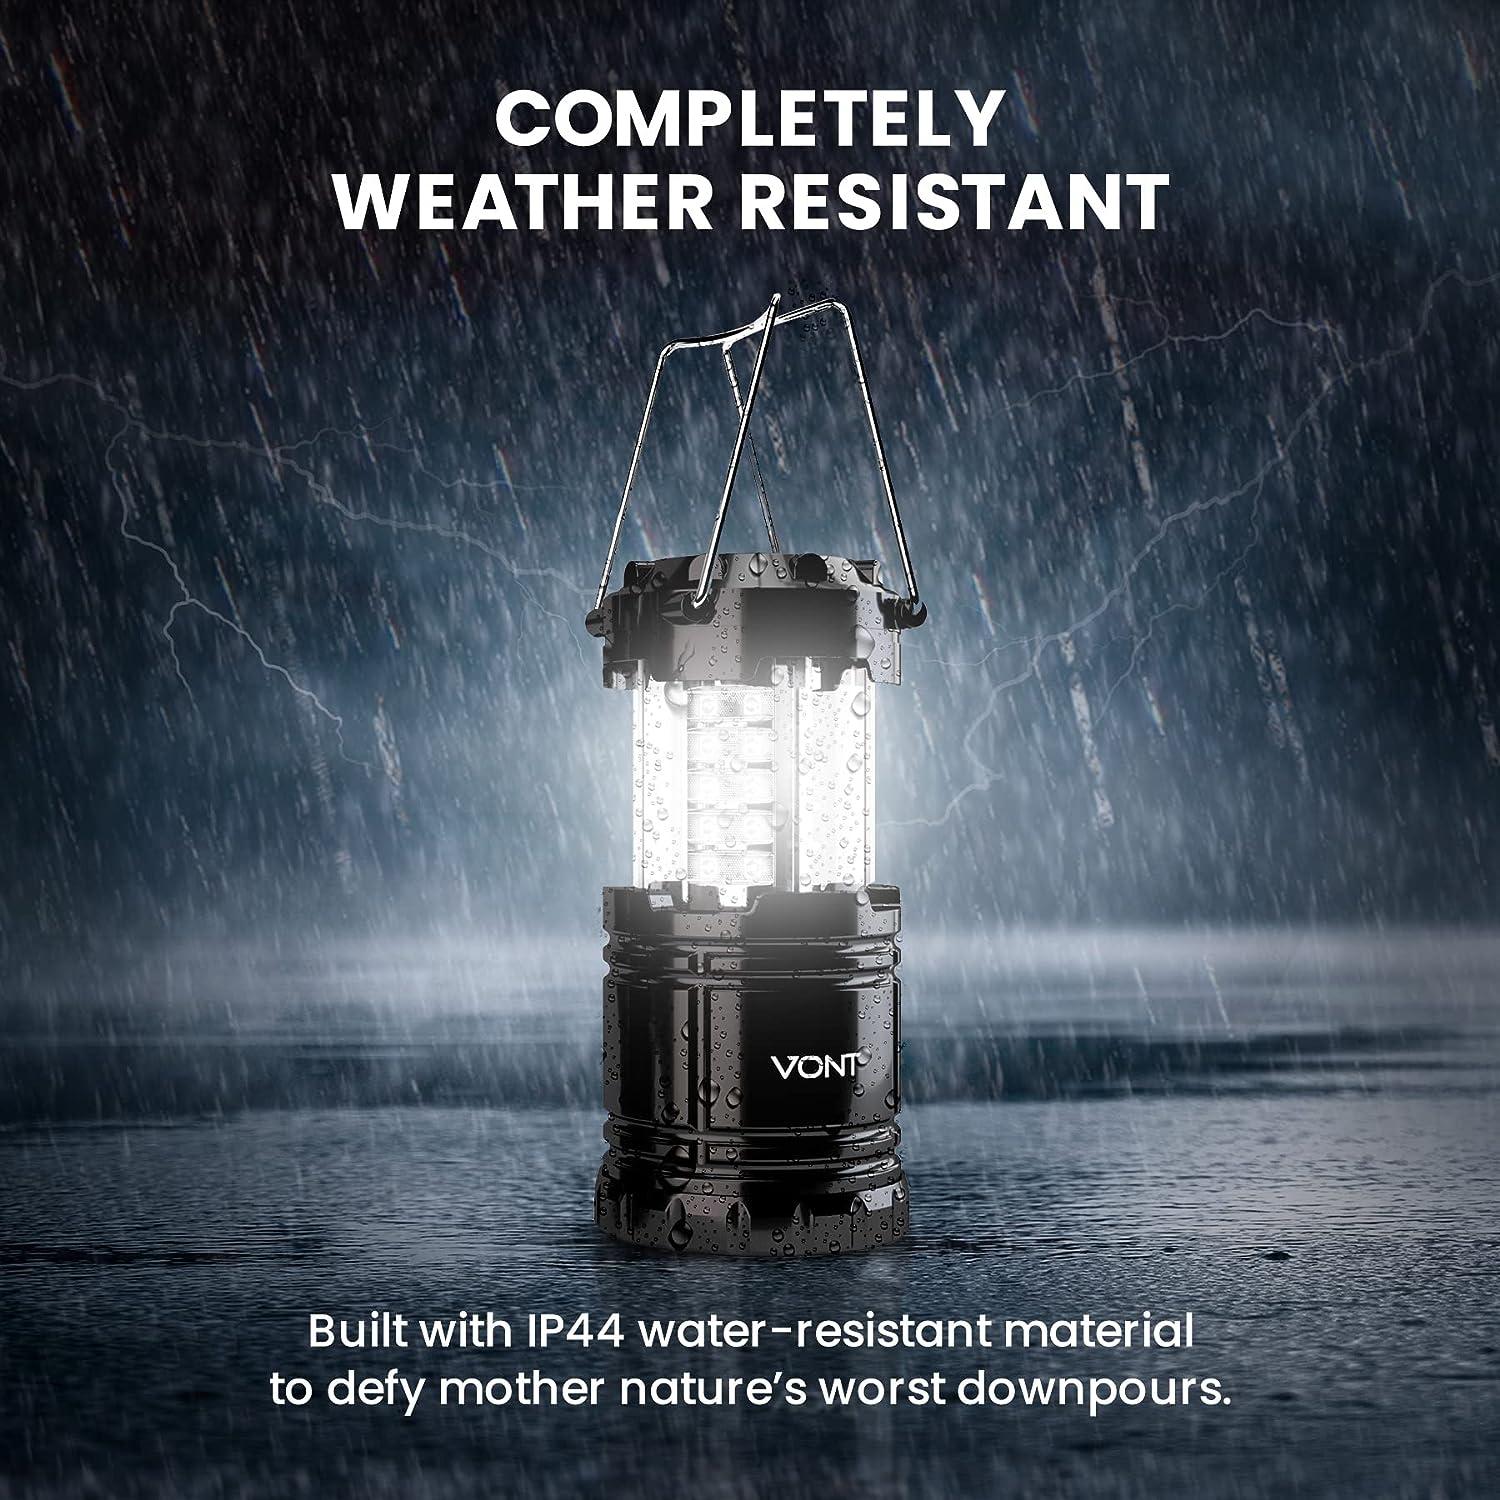 2 Pcs LED Solar Collapsible Camping Lantern, Super Bright Portable Survival  Lanterns, Must Have During Hurricane, Emergency, Storms, Outages, Original